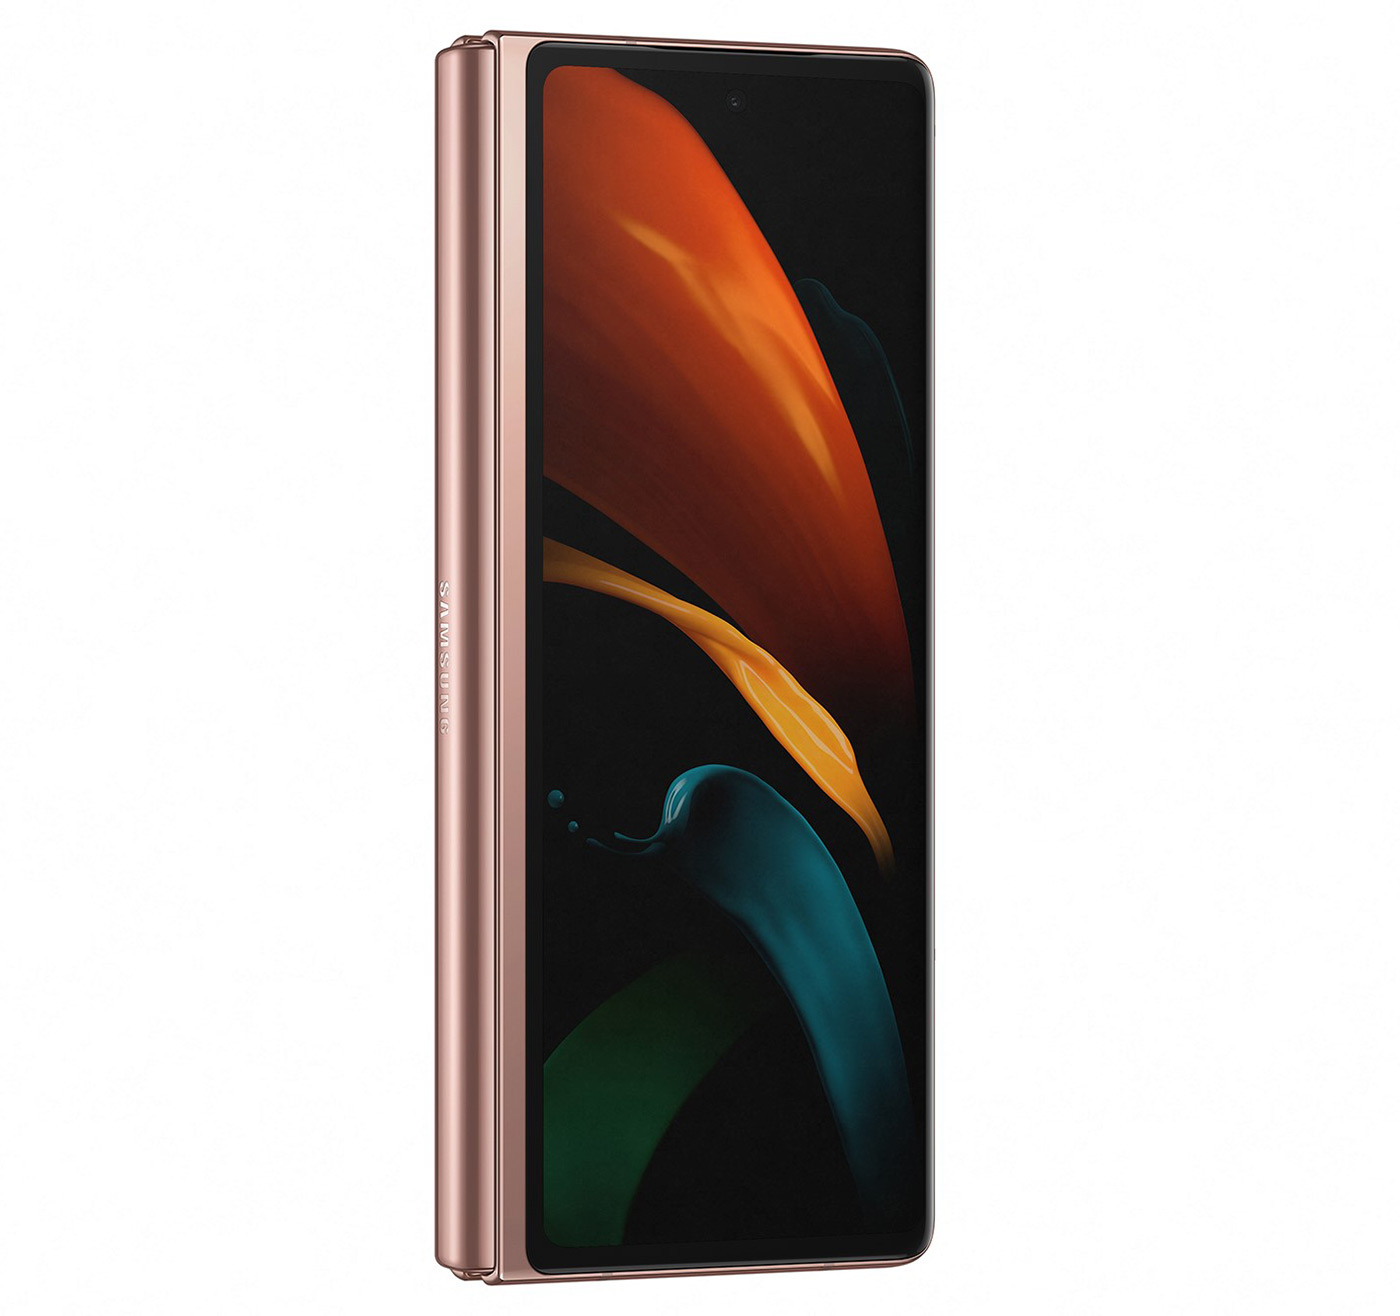 Galaxy Z Fold2 - maturing smartphone with a flexible screen, version number two